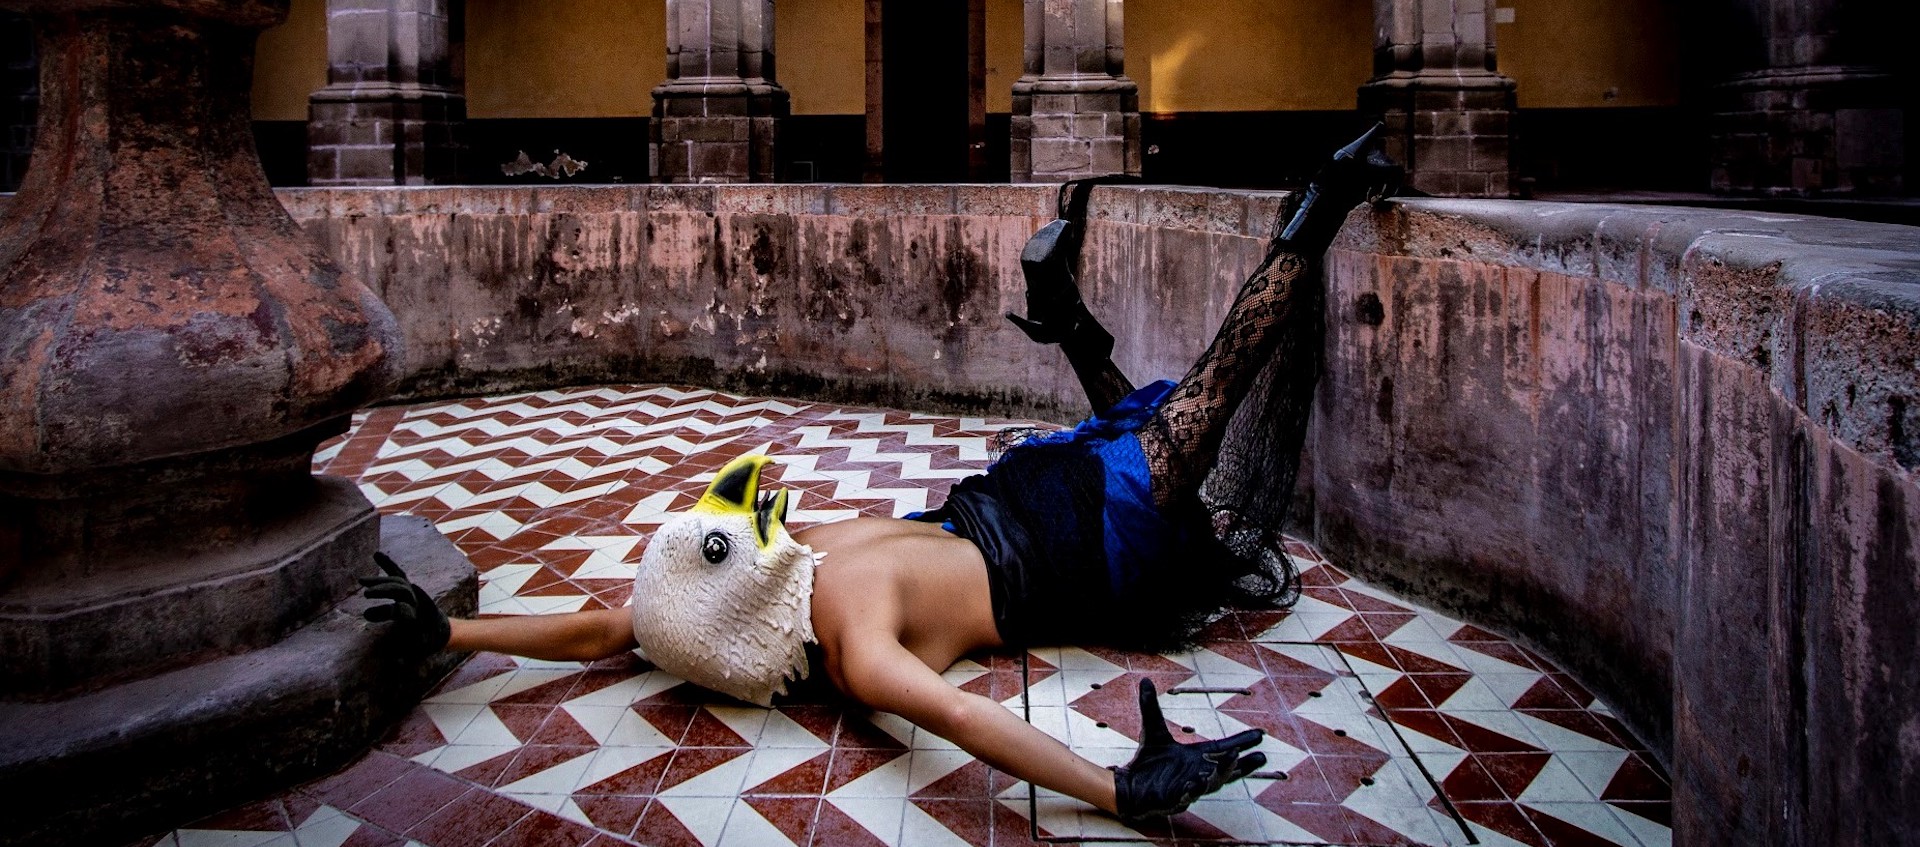 Jessica Bastidas from the group La Pocha Nostra lies face down on a tiled floor in the middle of a round space filled with aged columns, topless with a lacy skirt, tights and high heels, a large eagle mask covering her head